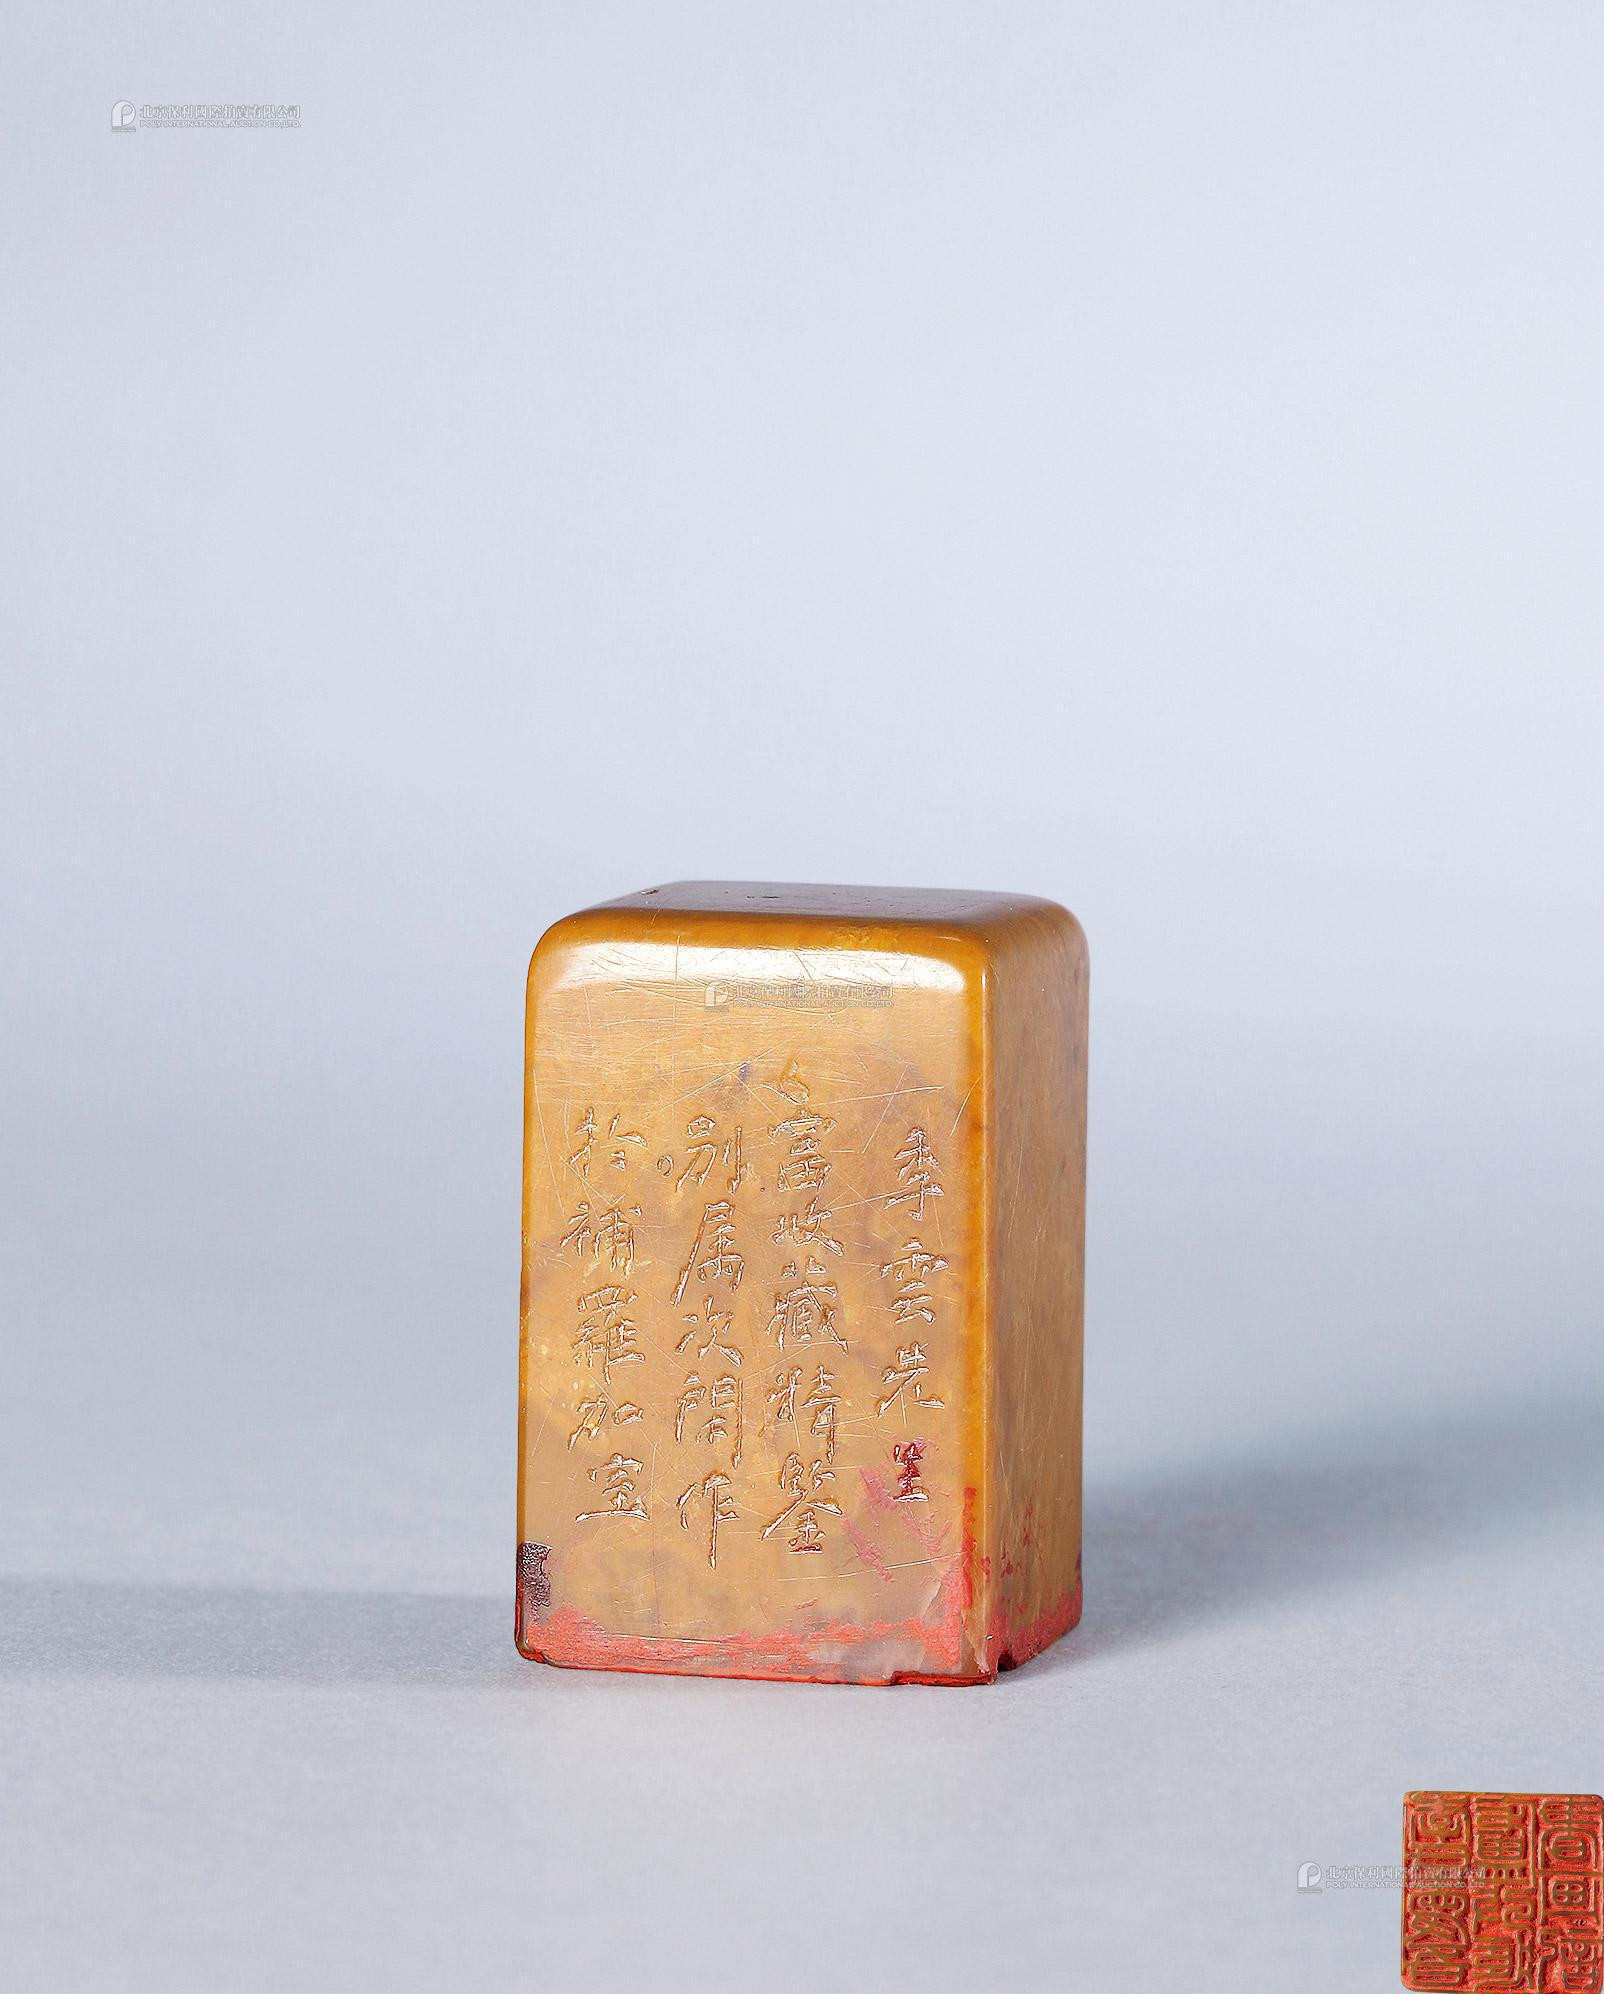 SOAPSTONE CARVED SQUARE SEAL IN SHALLOW RELIE INSCRIBED BY ZHAO CIXIAN